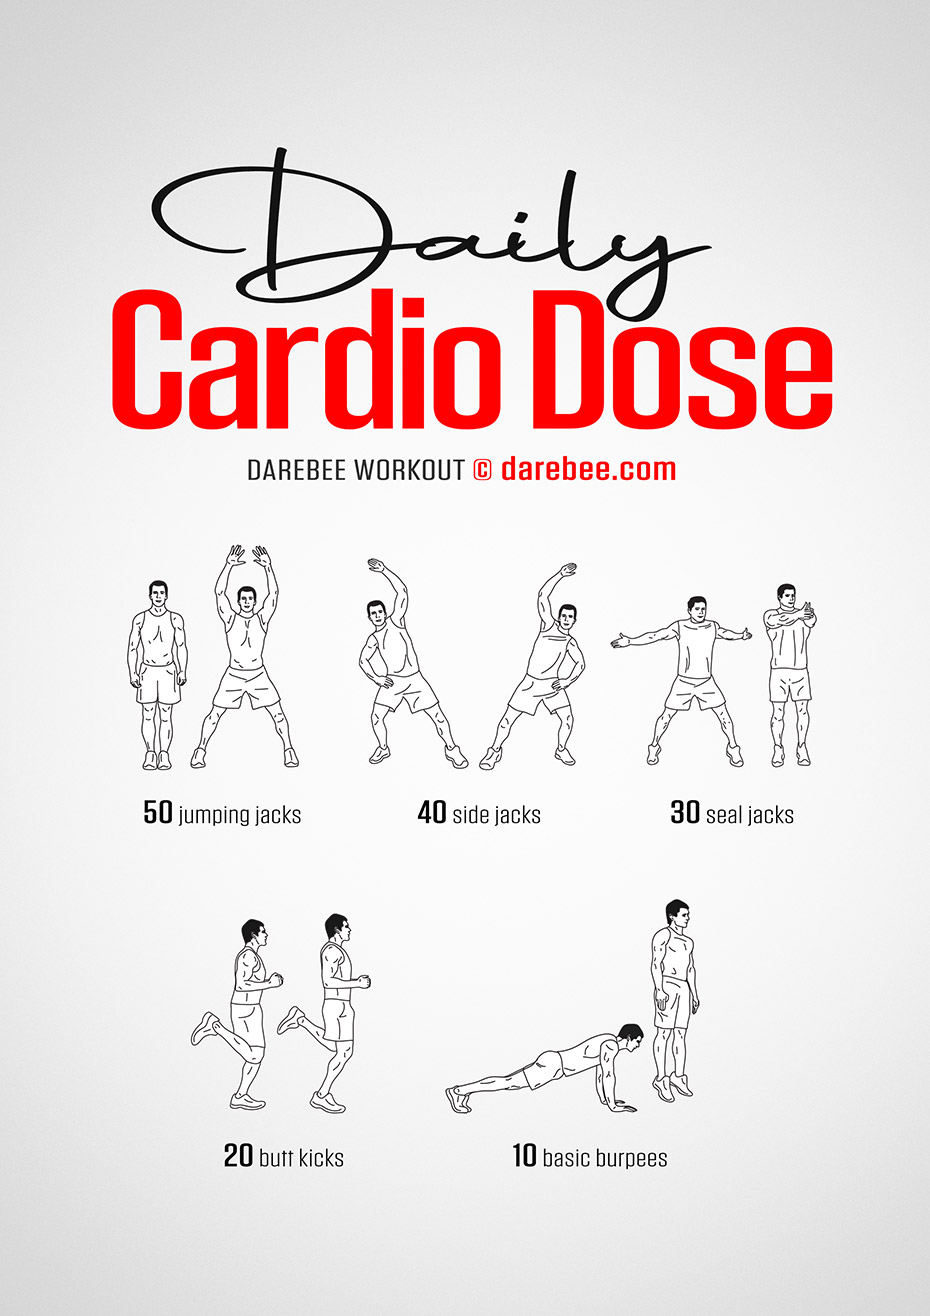 daily cardio workout app